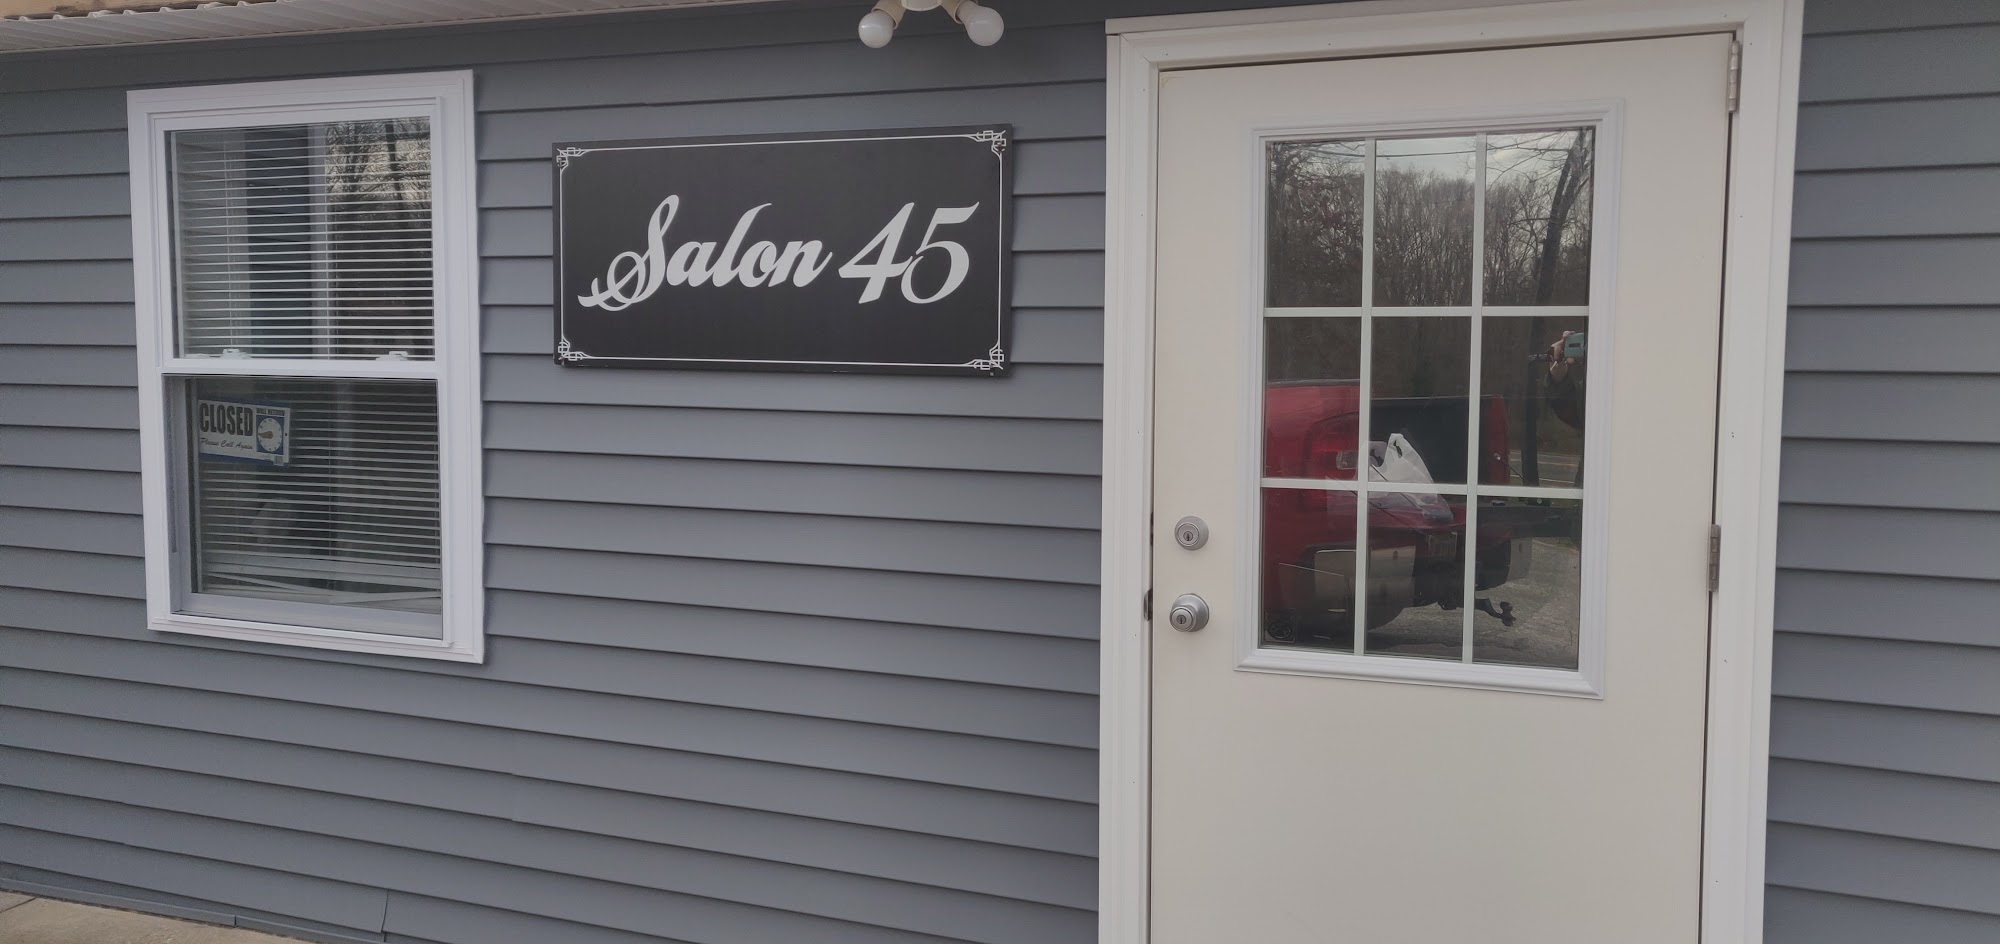 Salon 45 1605 IN-45, Solsberry Indiana 47459